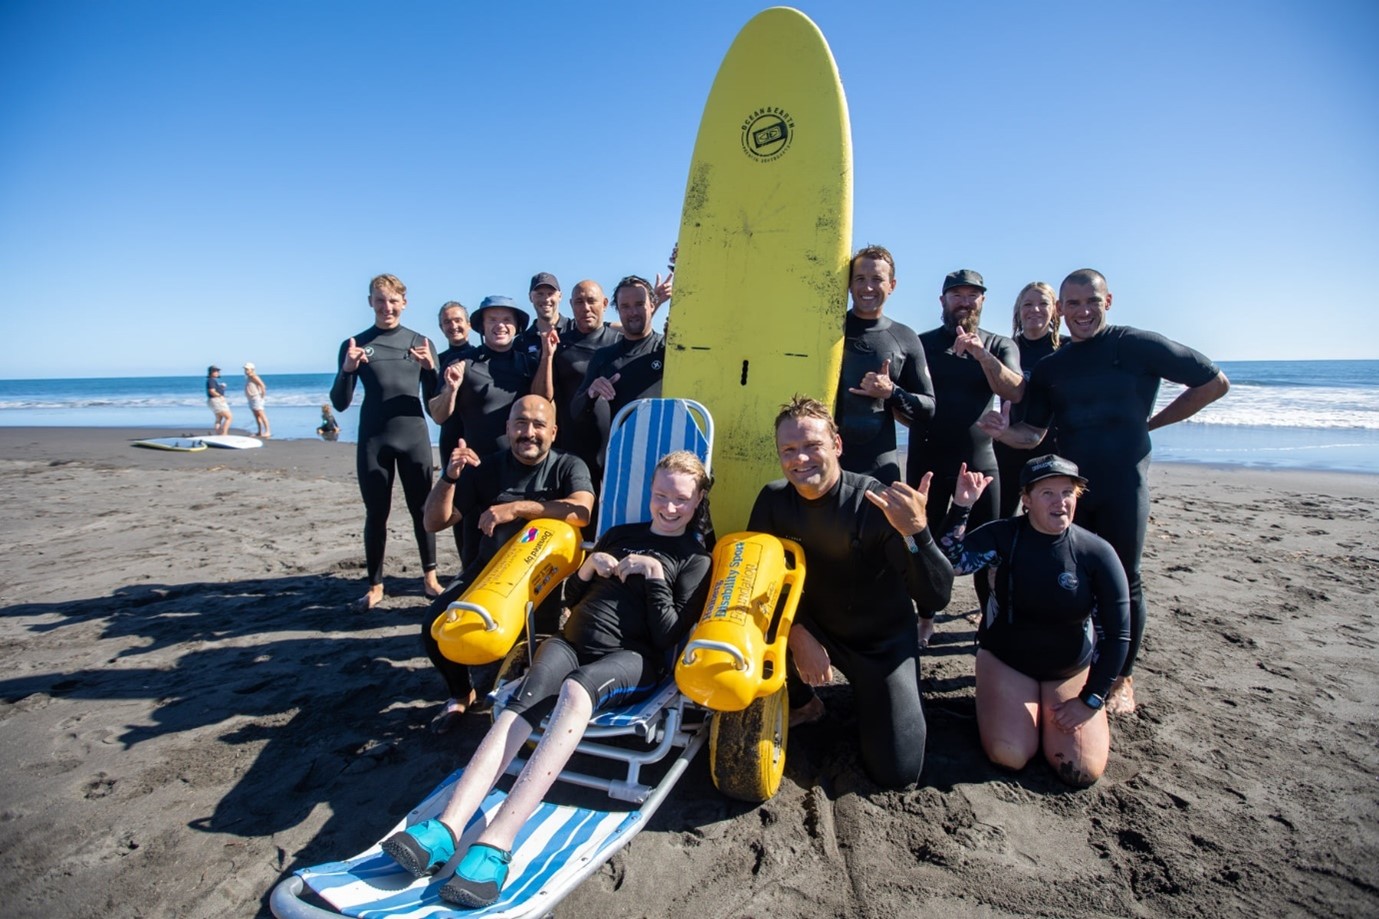 Group of people standing around a surfboard